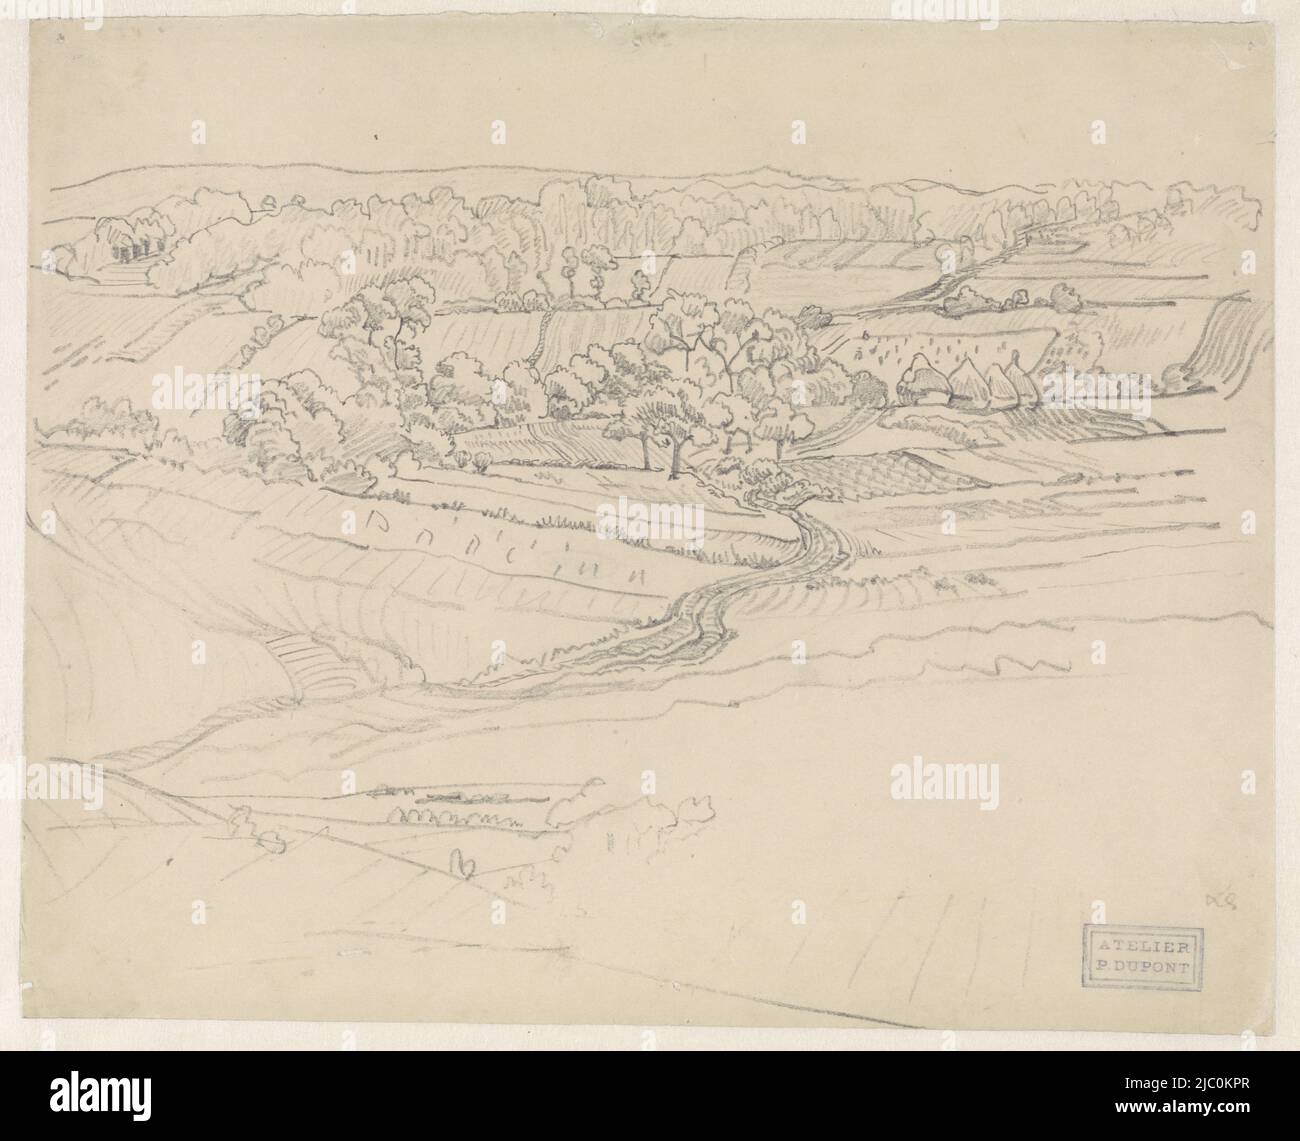 Landscape with winding road, draughtsman: Pieter Dupont, 1880 - 1911, paper, h 226 mm × w 280 mm Stock Photo